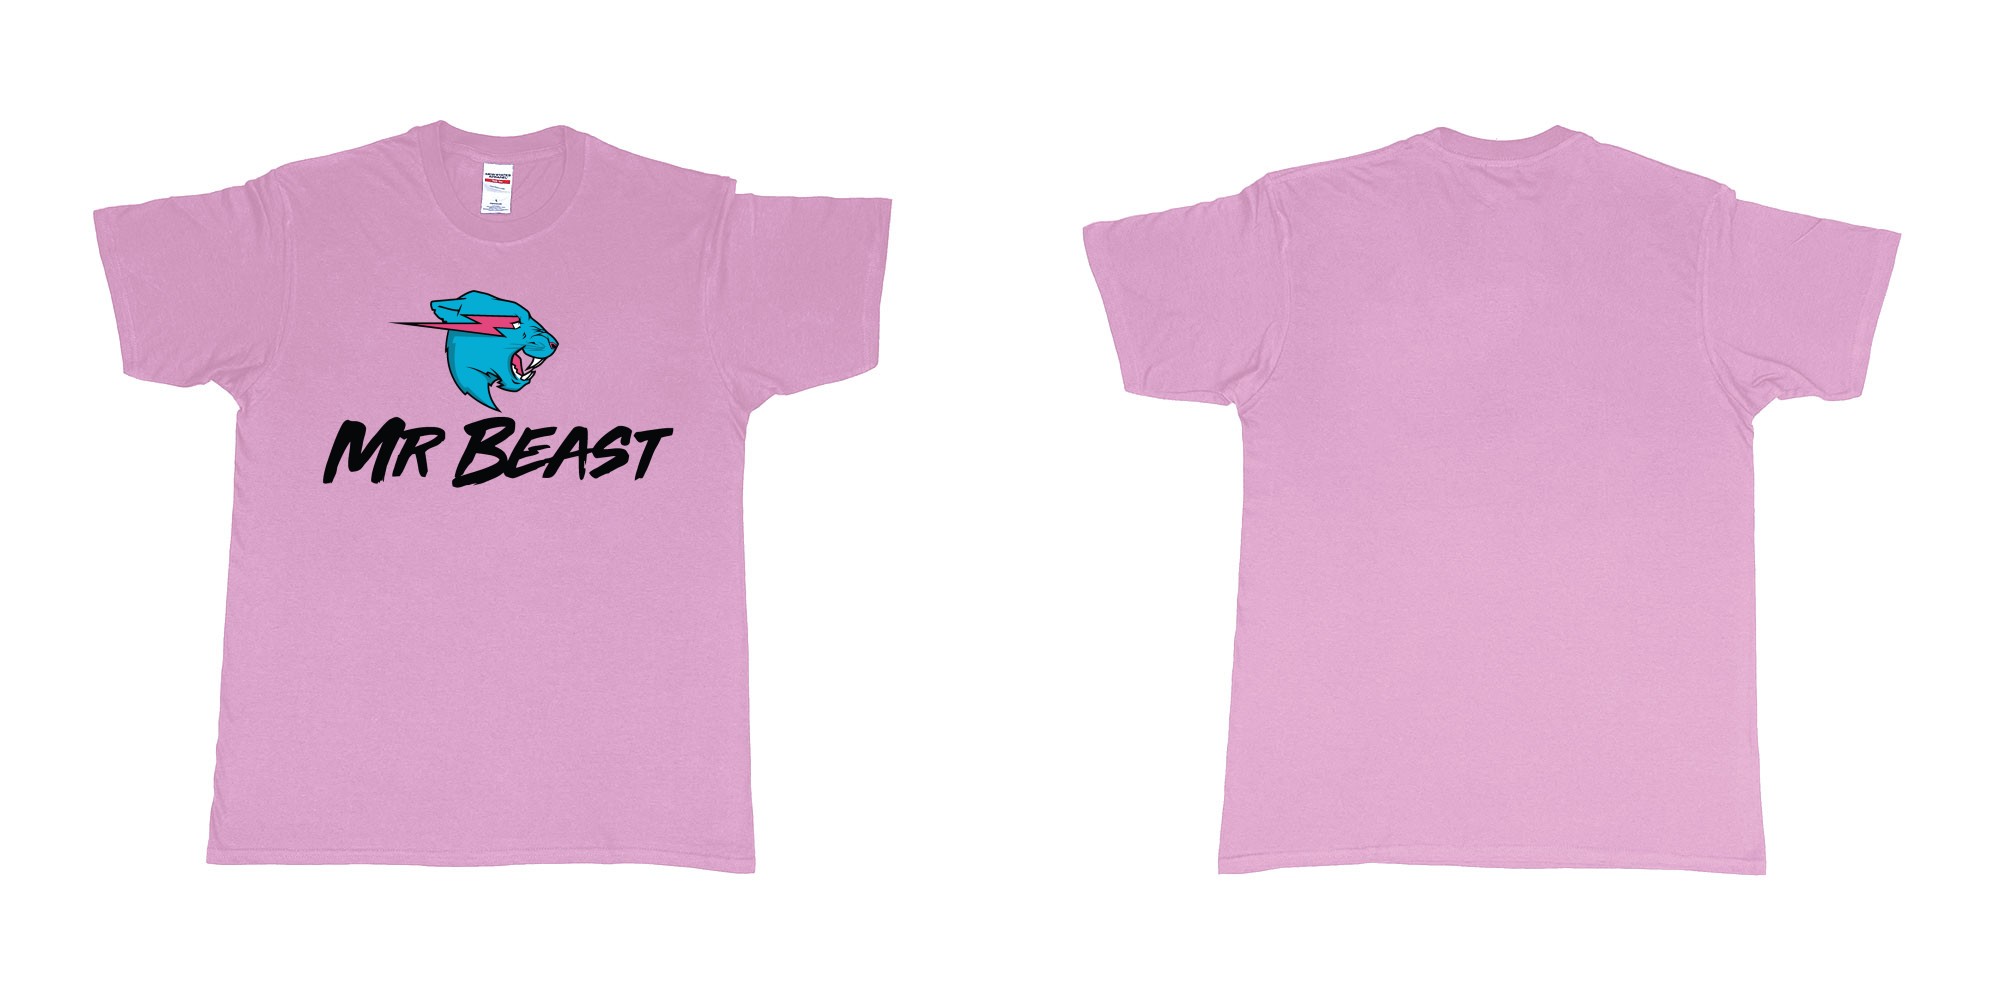 Custom tshirt design mr beast logo in fabric color light-pink choice your own text made in Bali by The Pirate Way